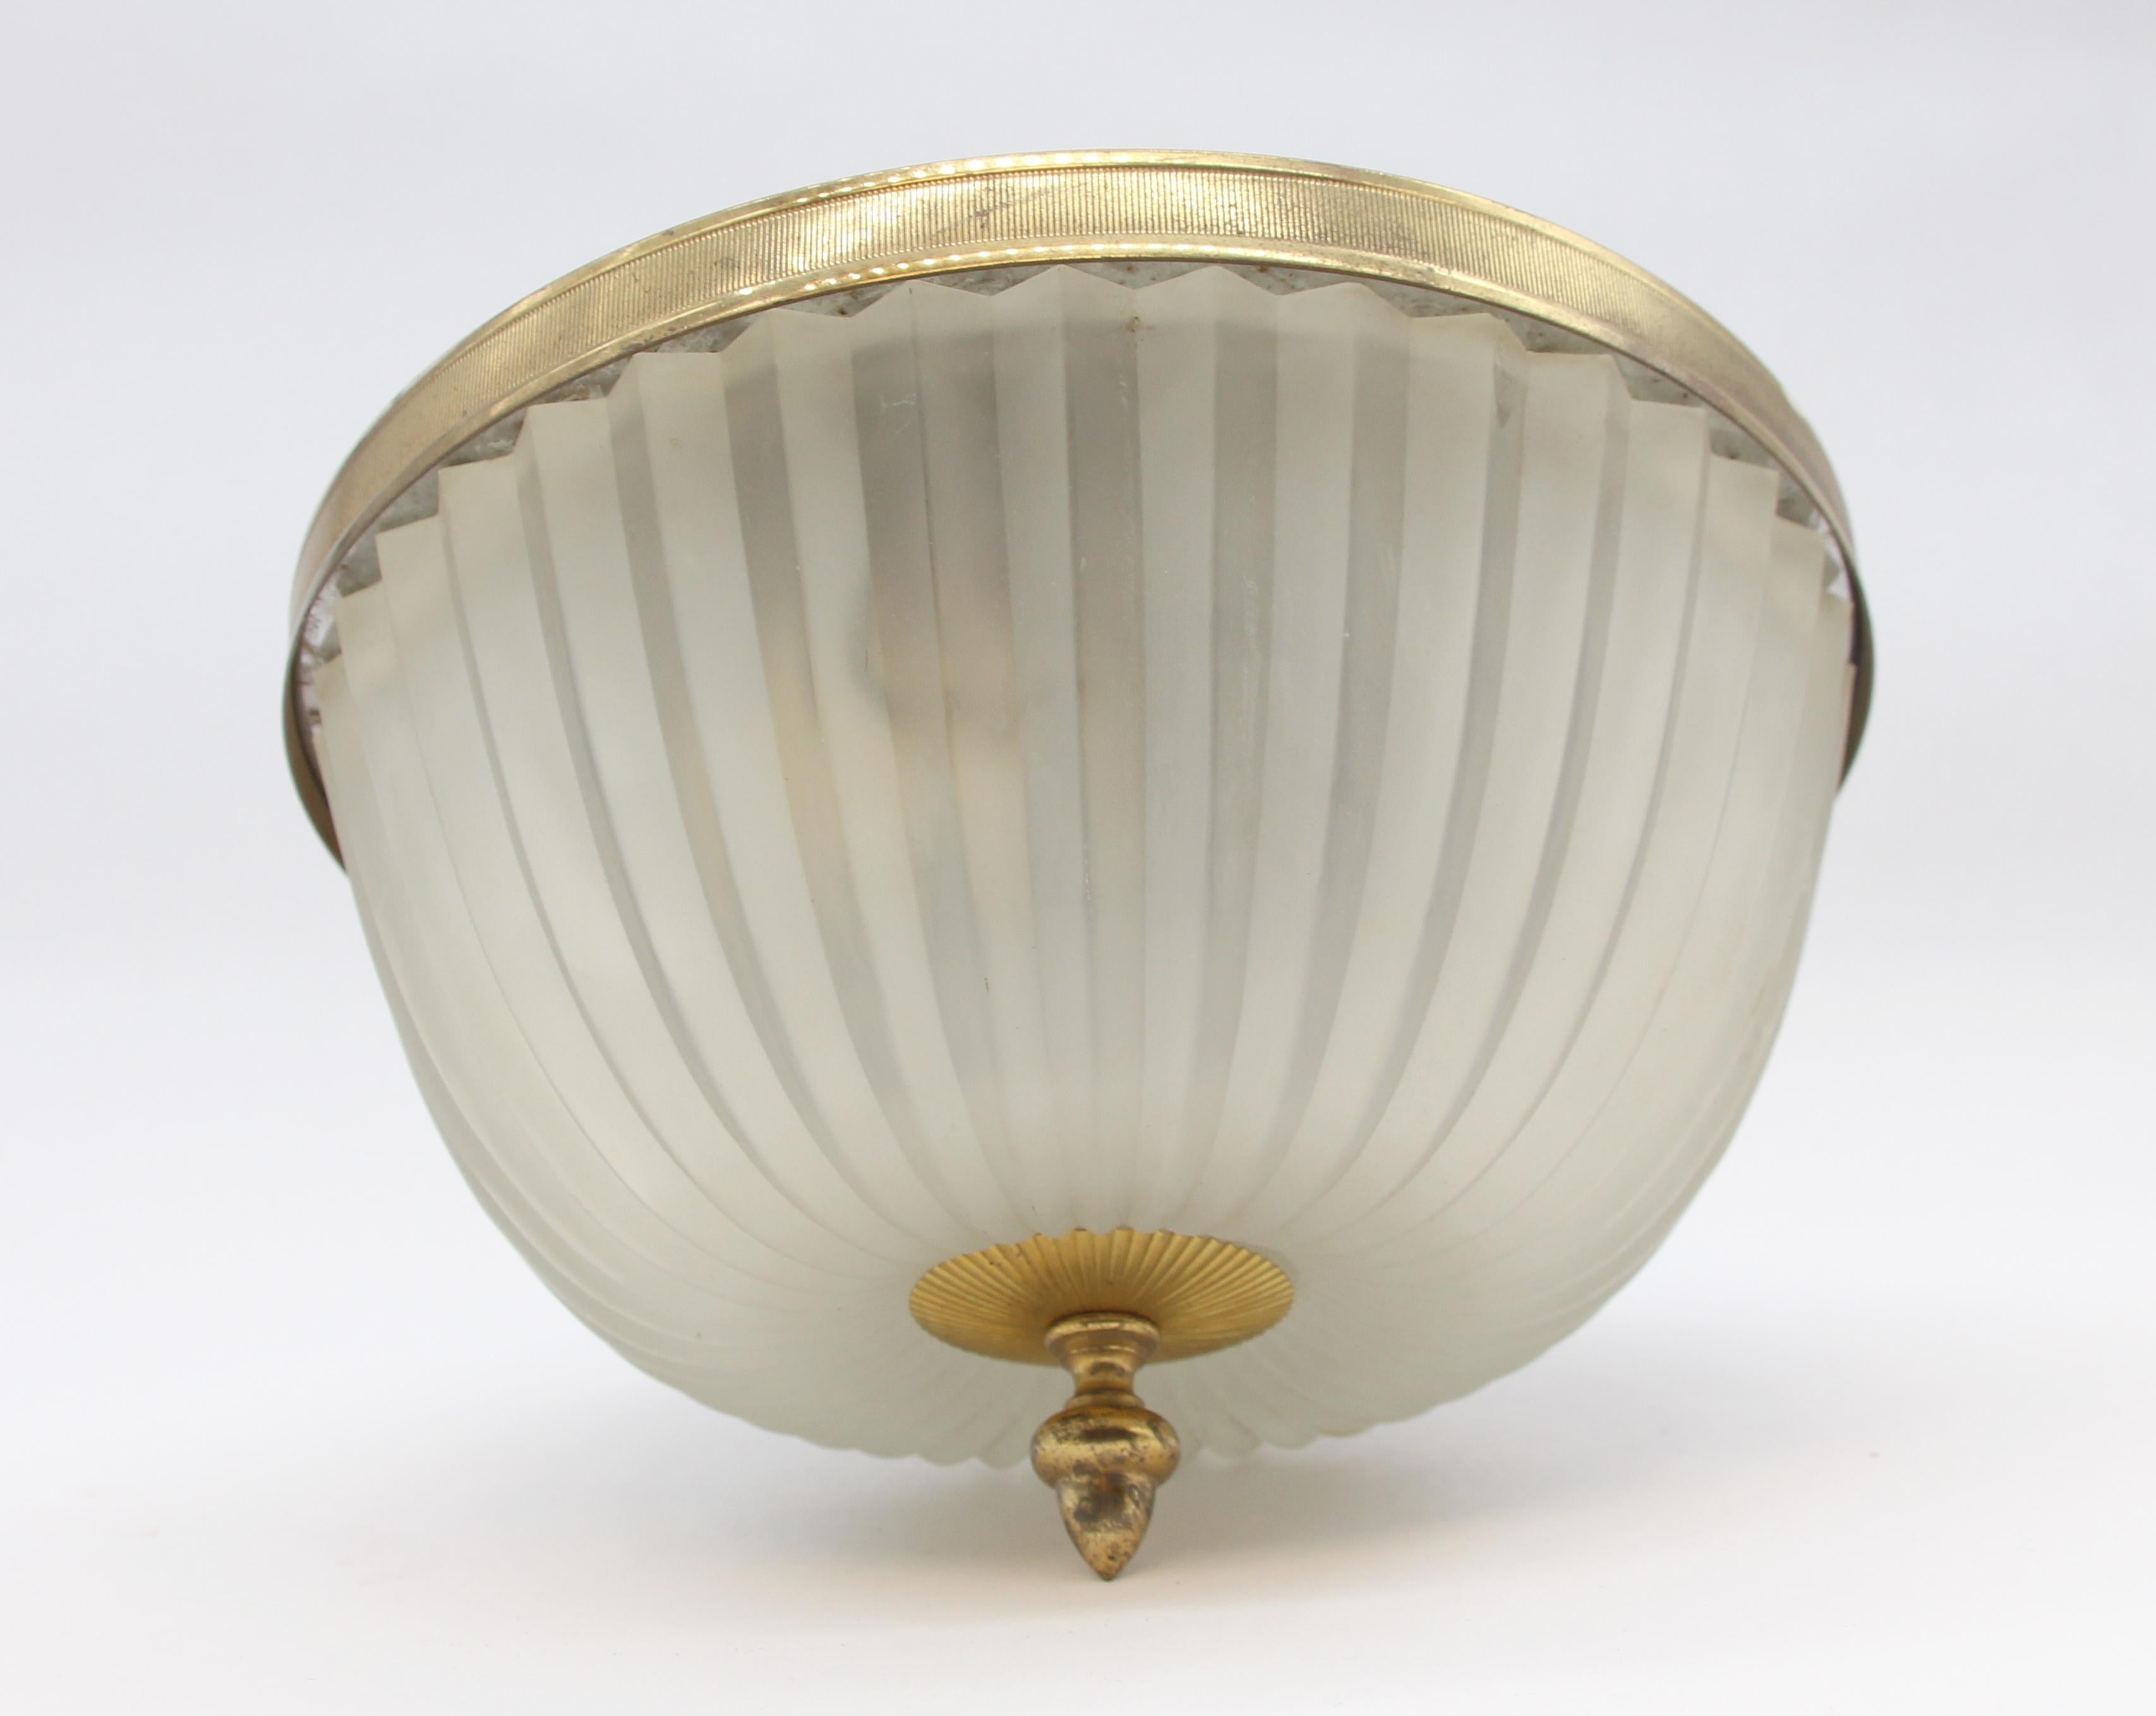 1960s brass flush mount light fixture with a heavy cast frosted prism style glass shade. Accented with a matching brass bottom final. Features three standard E26 sockets. Small quantity available at time of posting. Please inquire. Priced each.